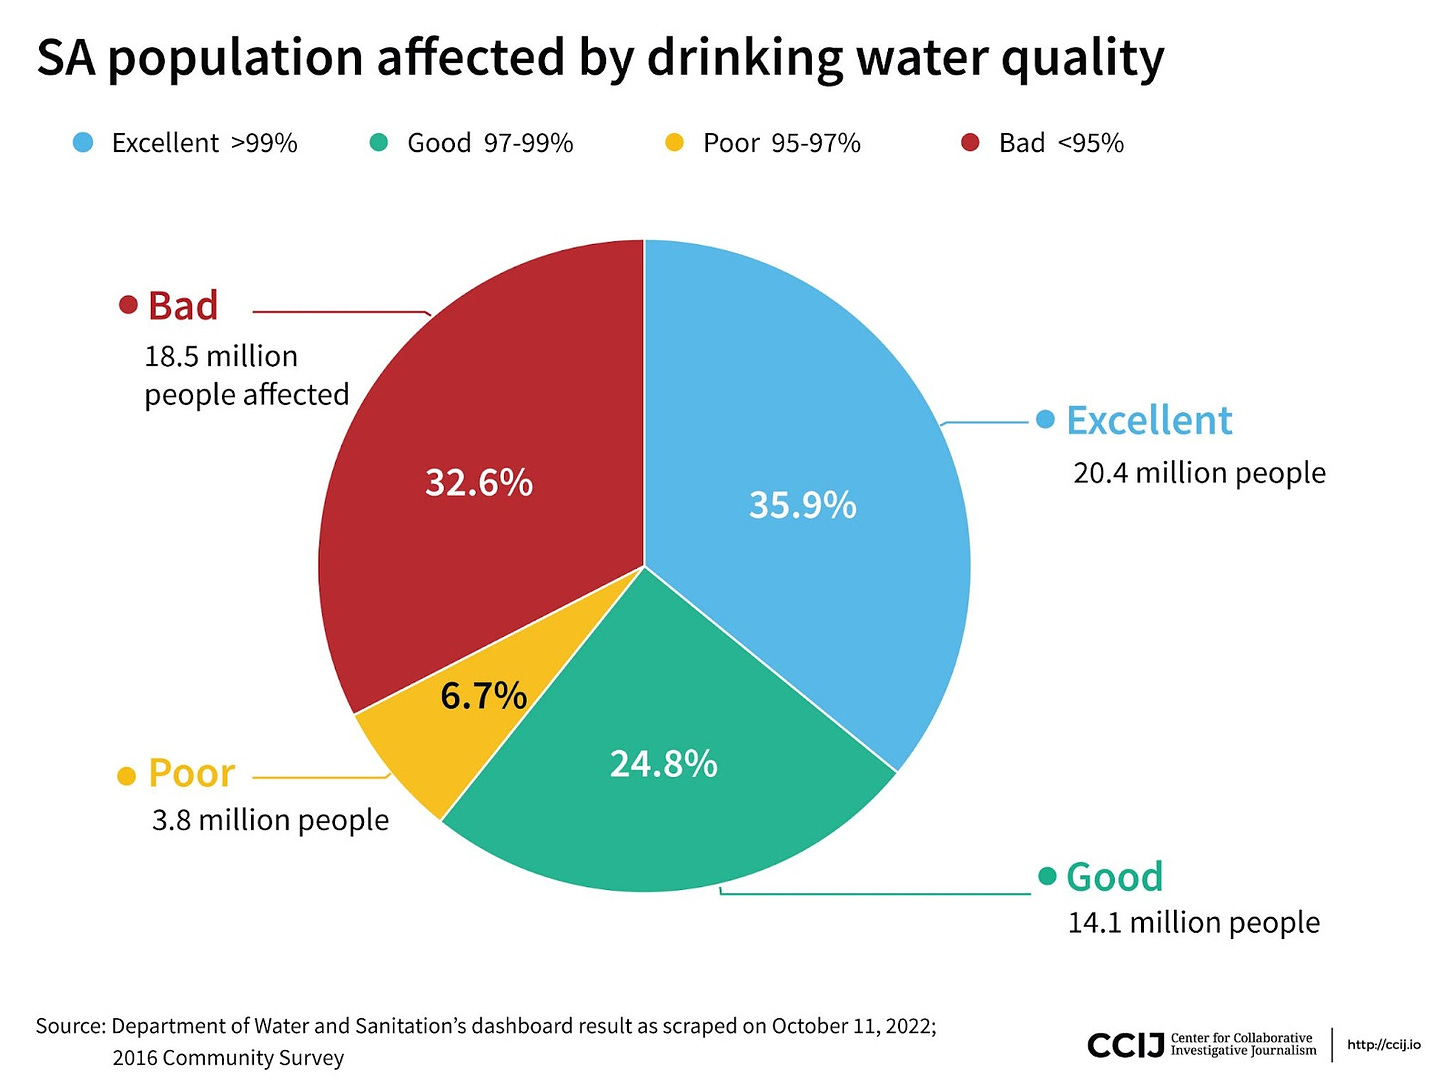 South Africa population affected by drinking water quality